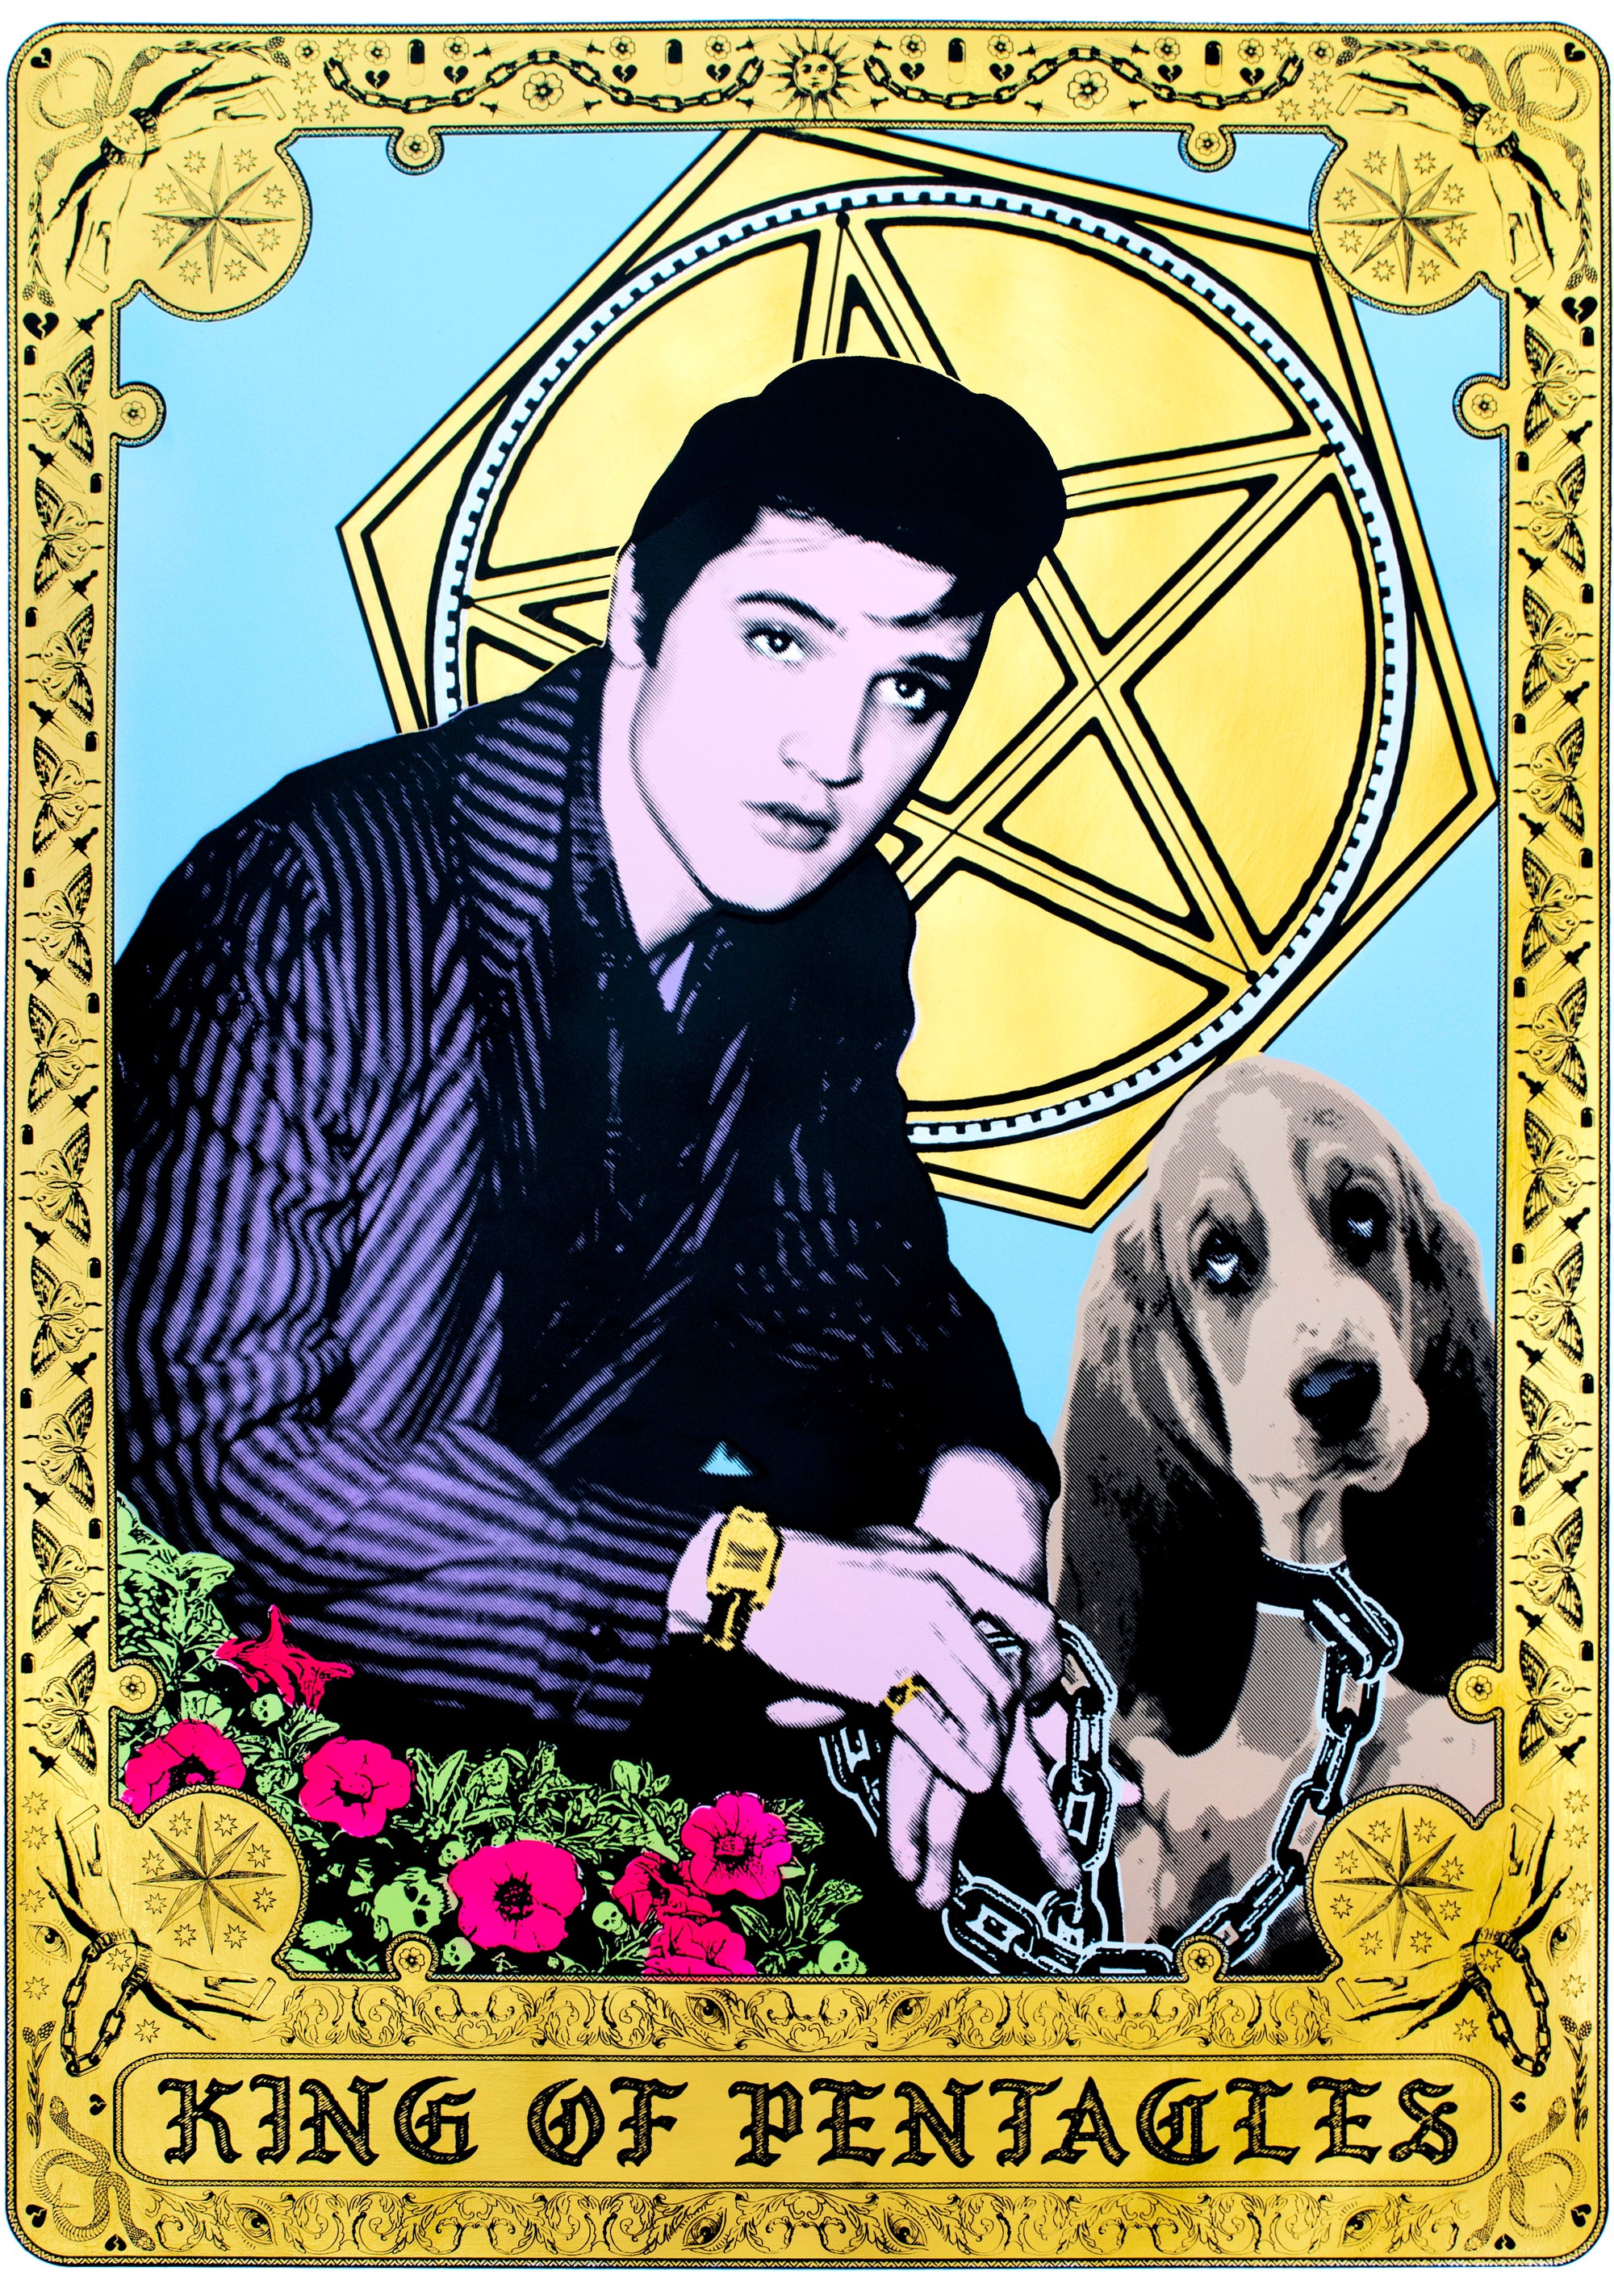 The Cameron Twins - King of Pentacles (Elvis)